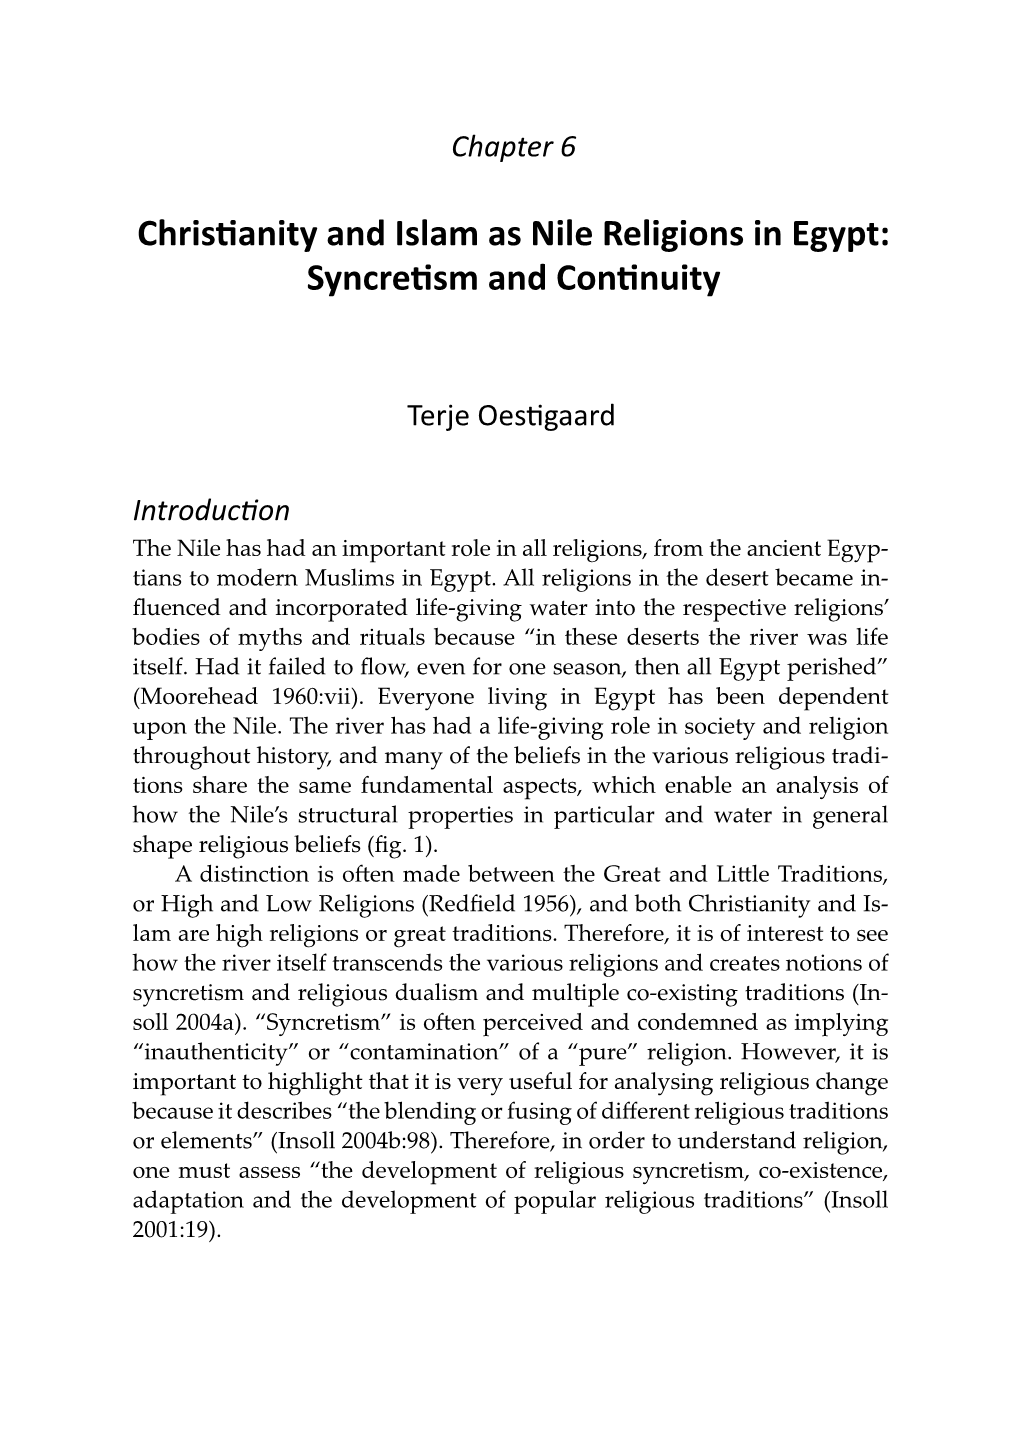 Christianity and Islam As Nile Religions in Egypt: Syncretism and Continuity